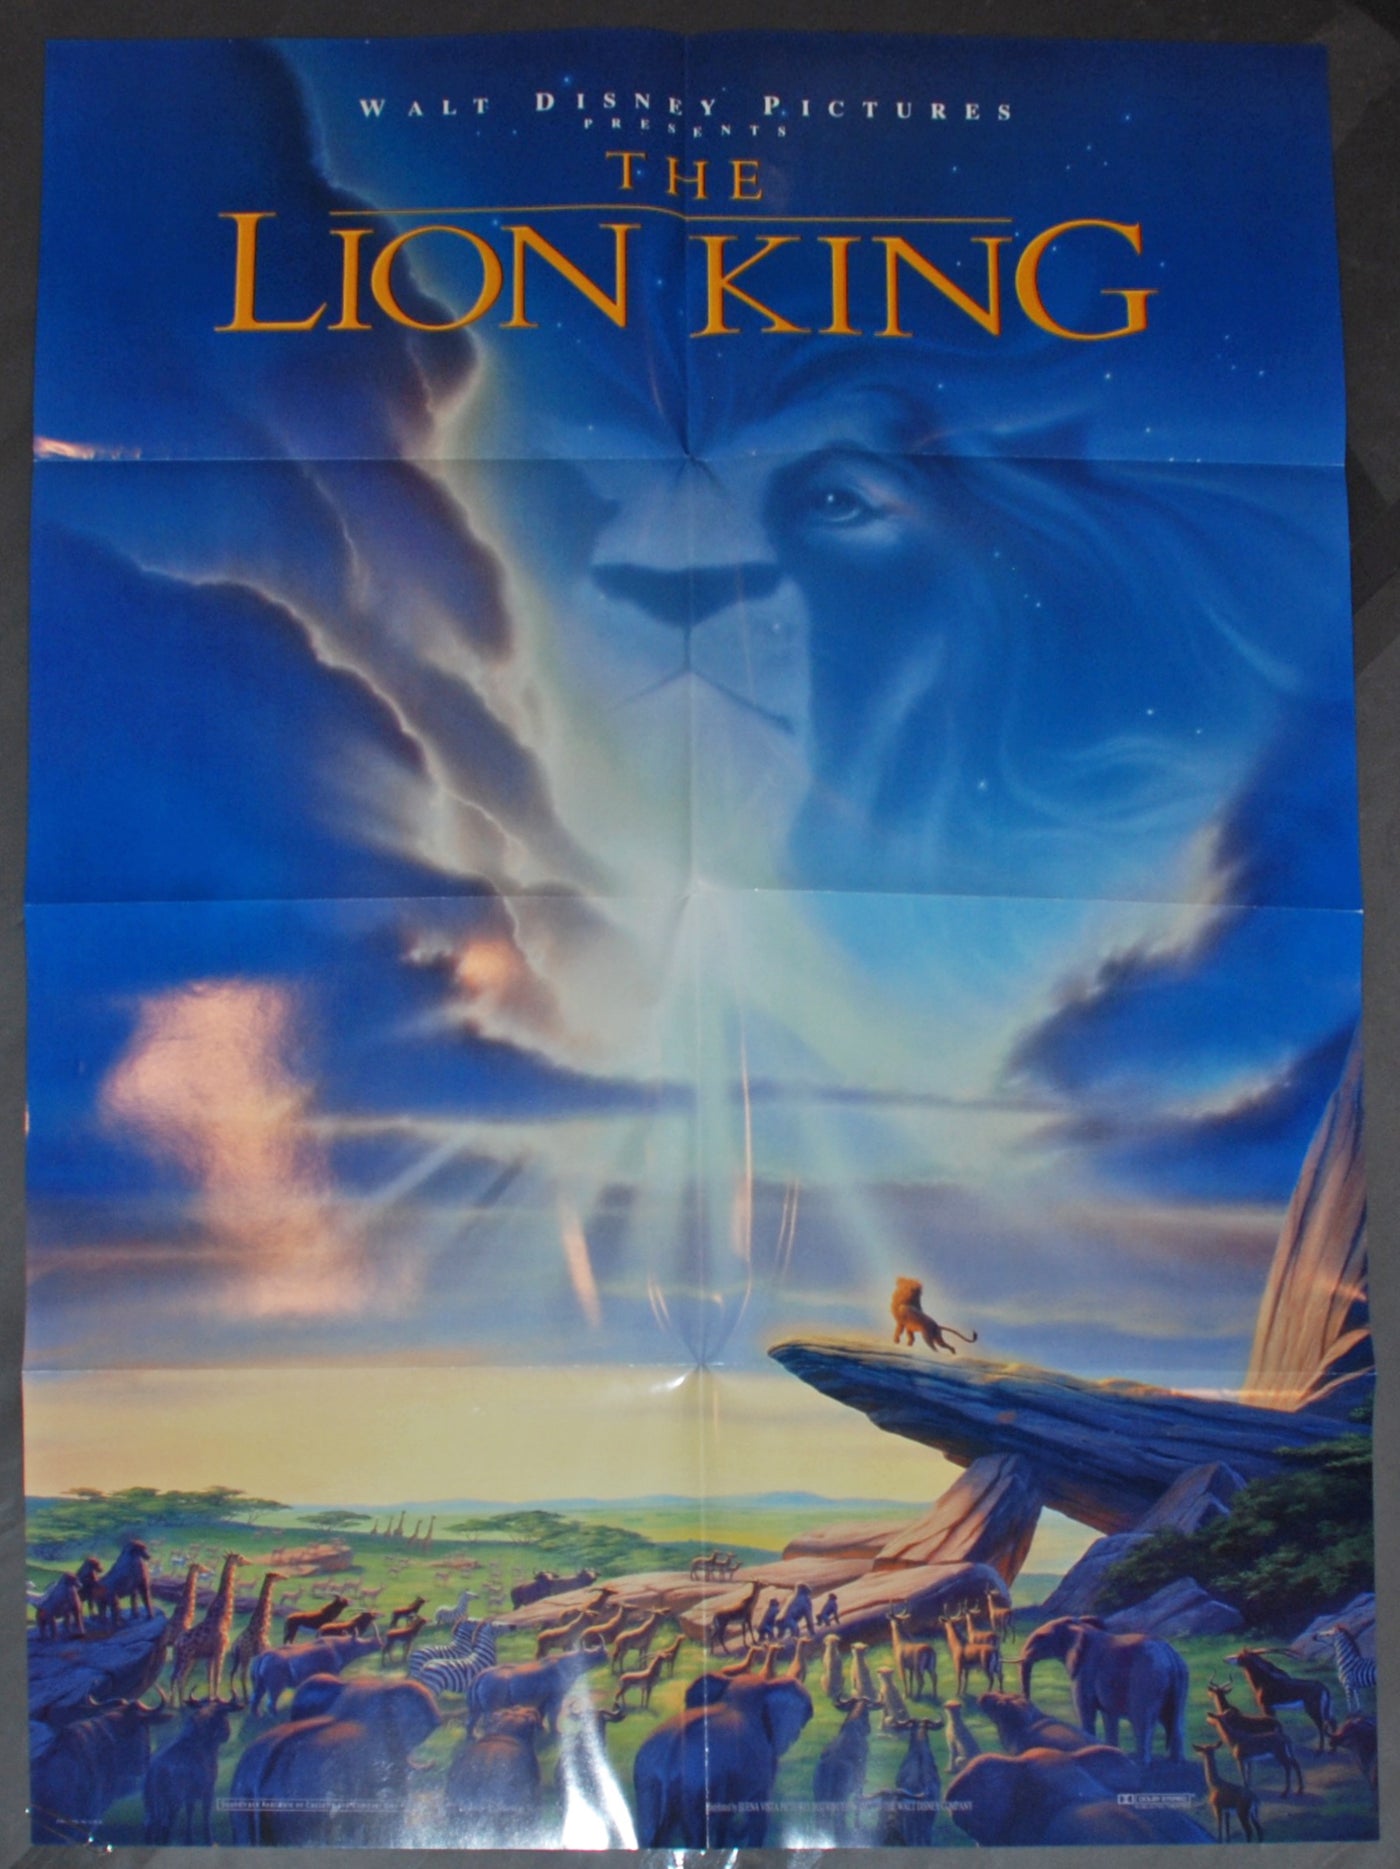 Disney Animation One-Sheet Movie Poster from The Lion King